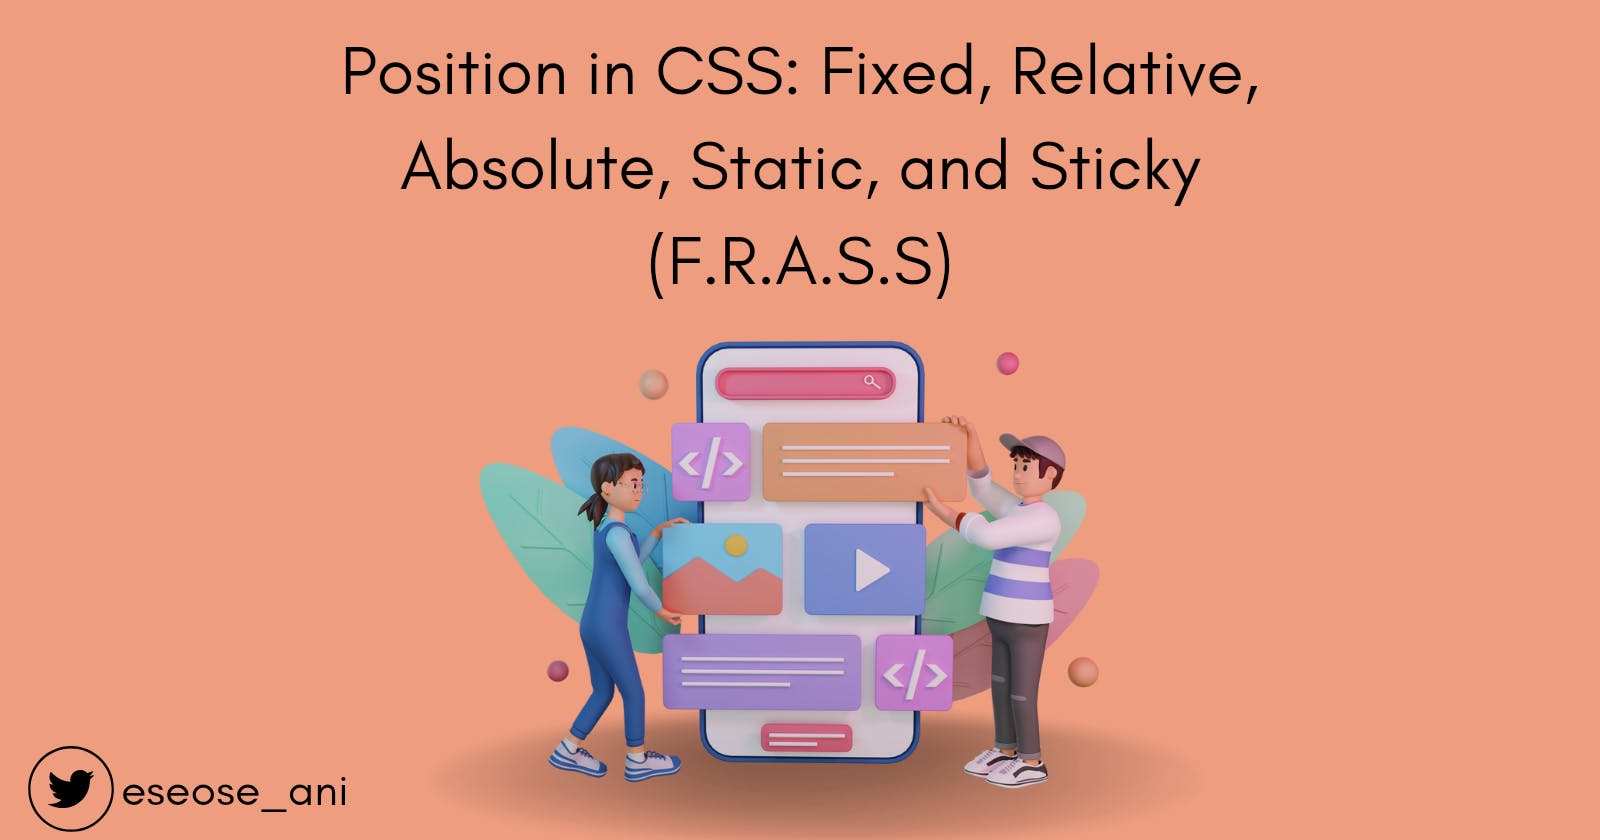 Position in CSS: Fixed, Relative, Absolute, Static, and Sticky (F.R.A.S.S)